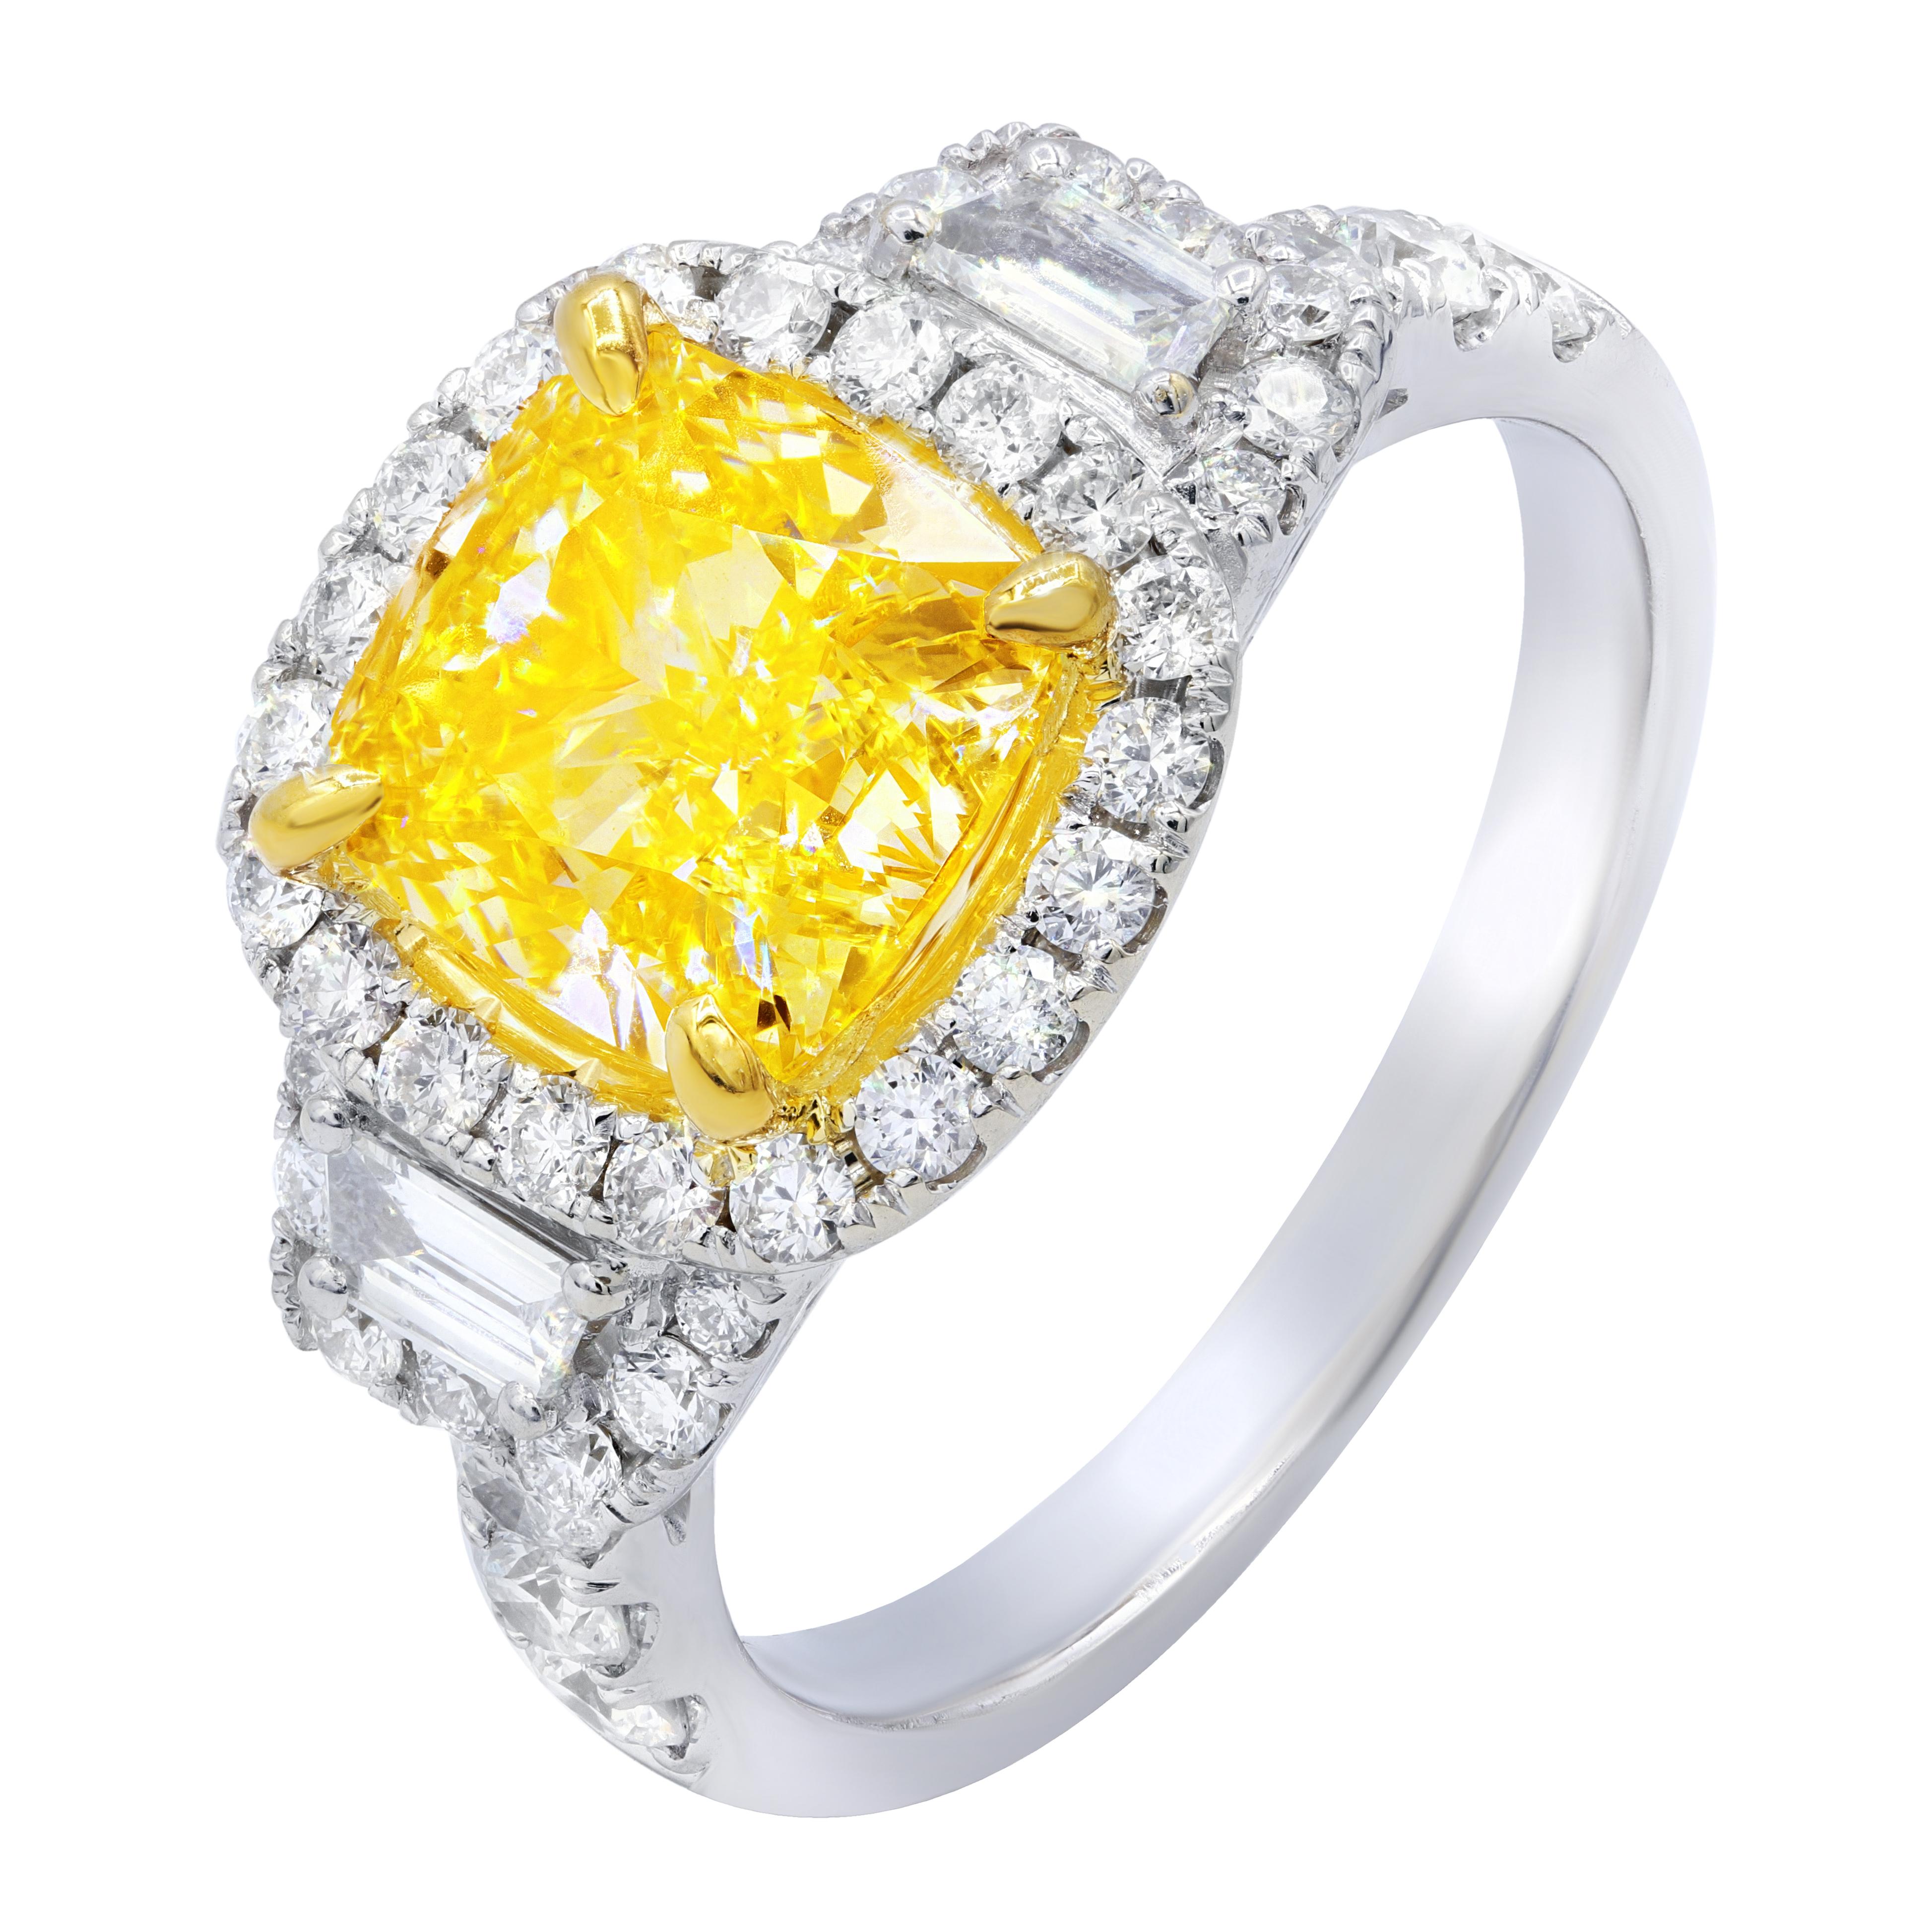 Fancy Yellow Diamond Ring Set in Halo Settings with Trapezoids